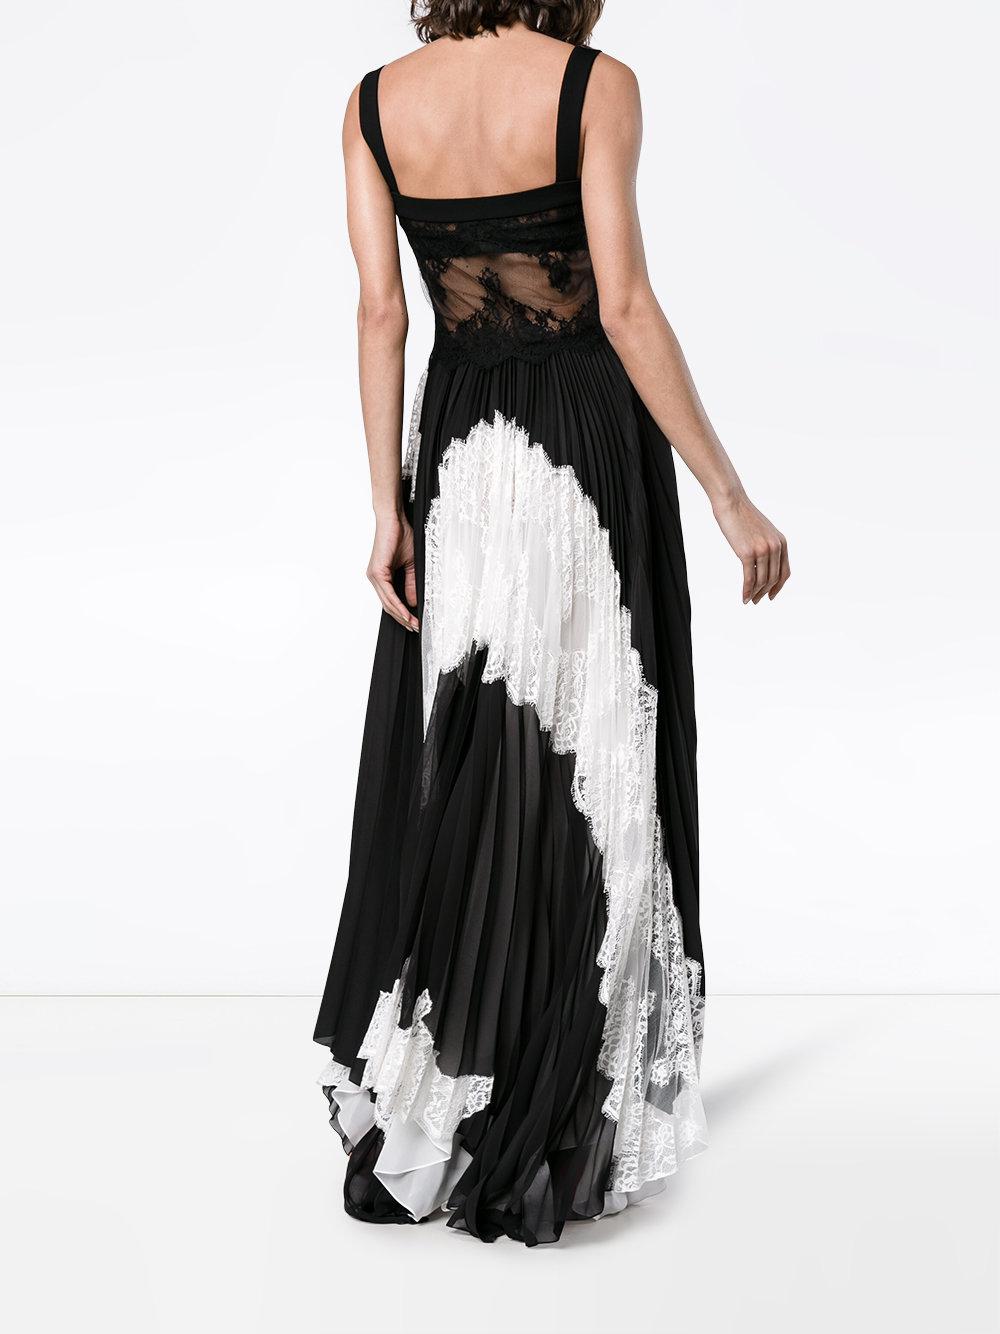 Givenchy Silk Lace Top Pleated Dress in Black - Lyst